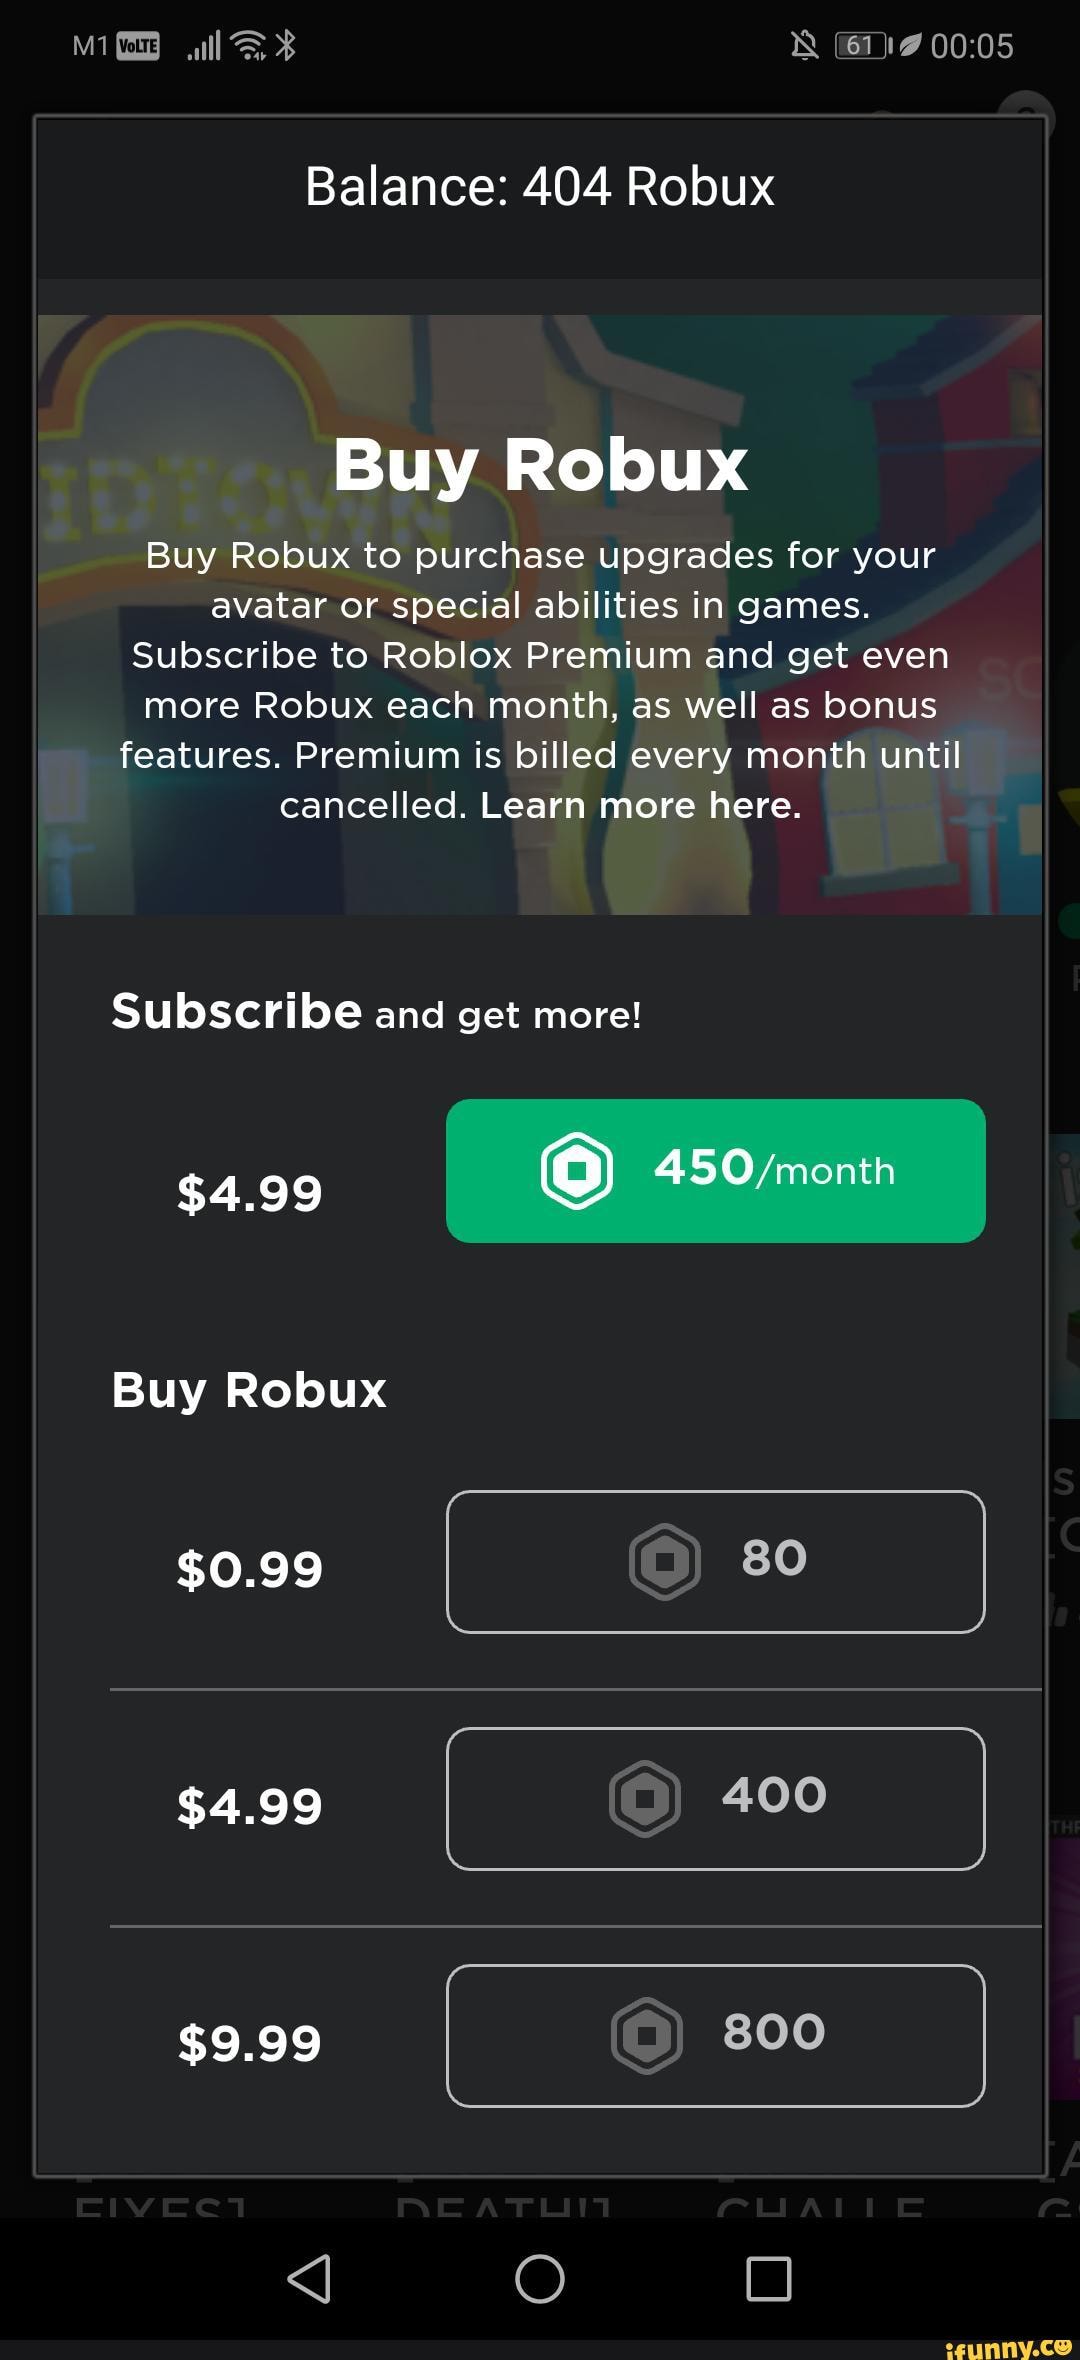 Balance 404 Robux Buy Robux Buy Robux To Purchase Upgrades For Your Avatar Or Special Abilities In Games Subscribe To Roblox Premium And Get Even More Robux Each Month As Well As - 450 robux a month